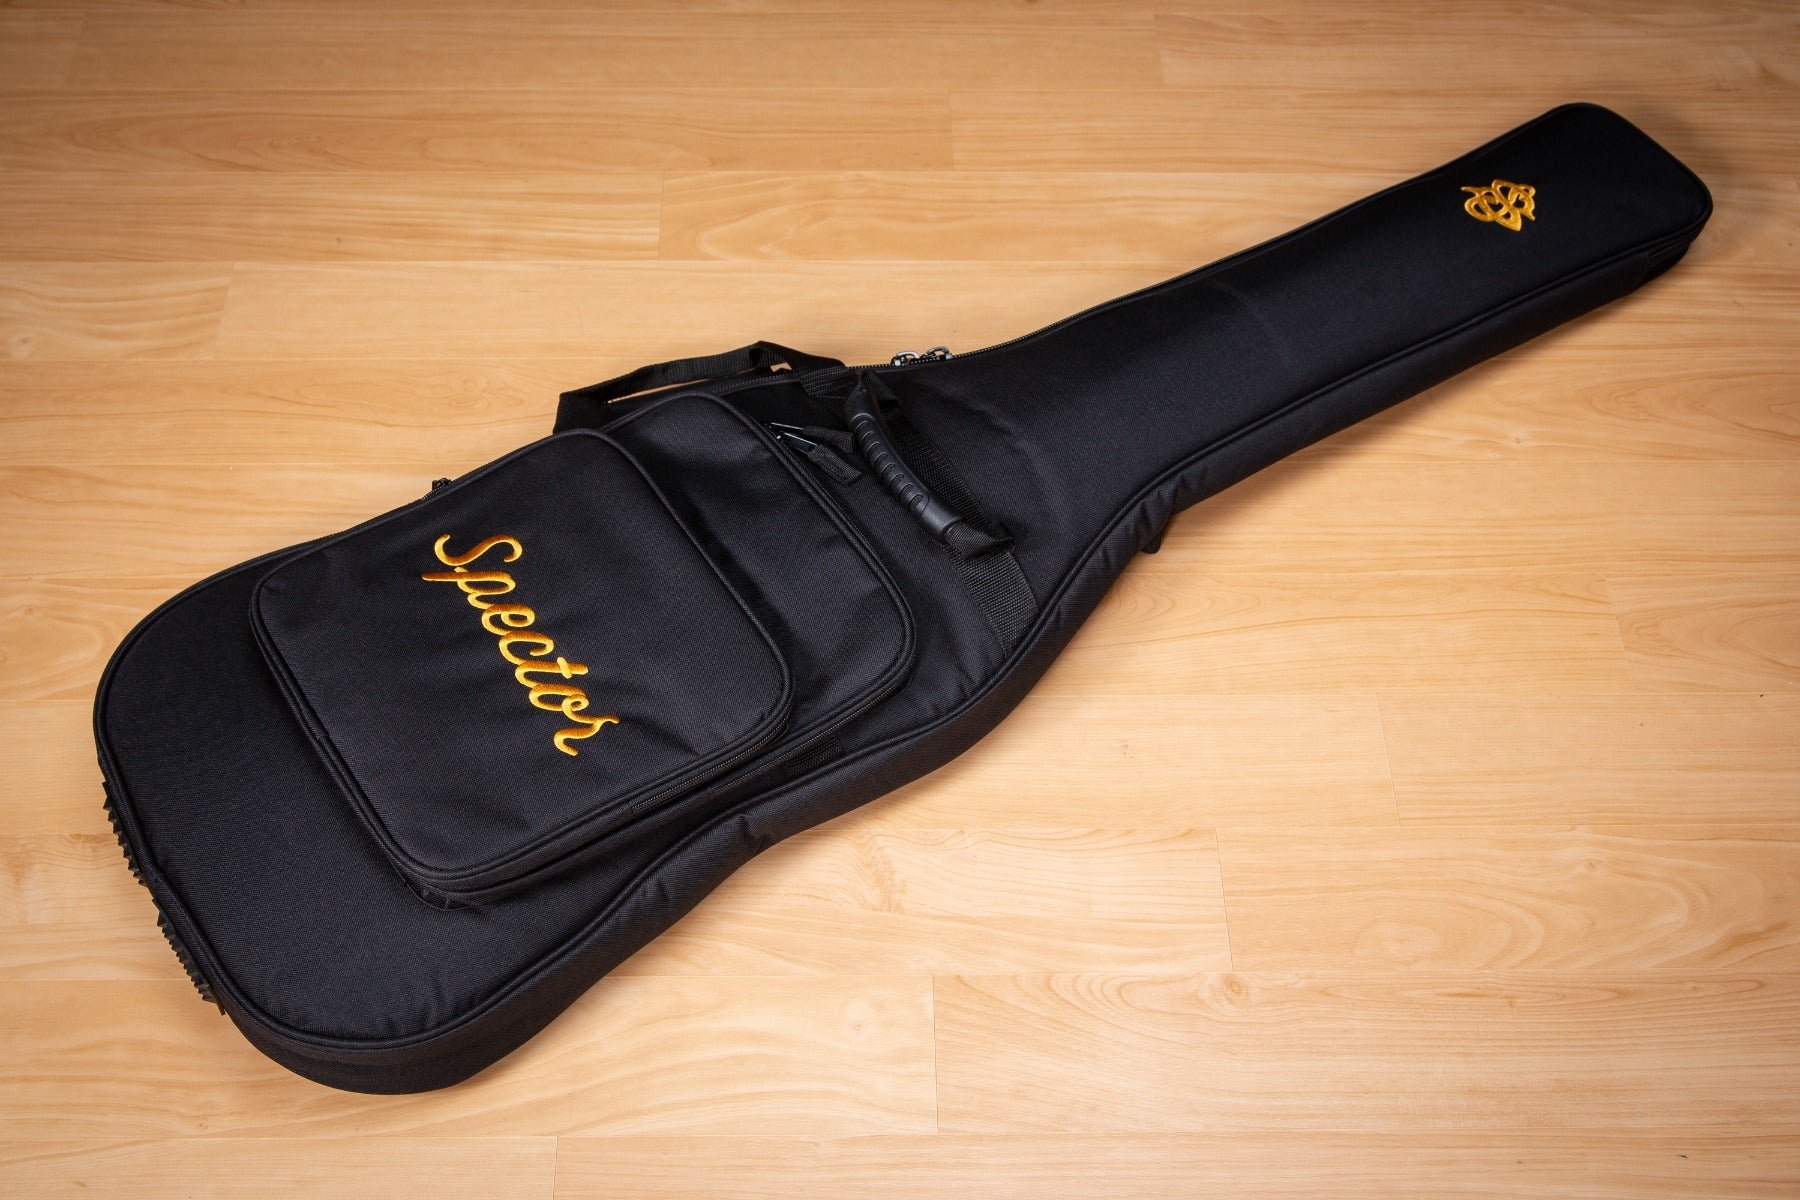 Included guitar bag for the Spector NS Ethos 5 Bass Guitar - Interstellar Gloss view 1